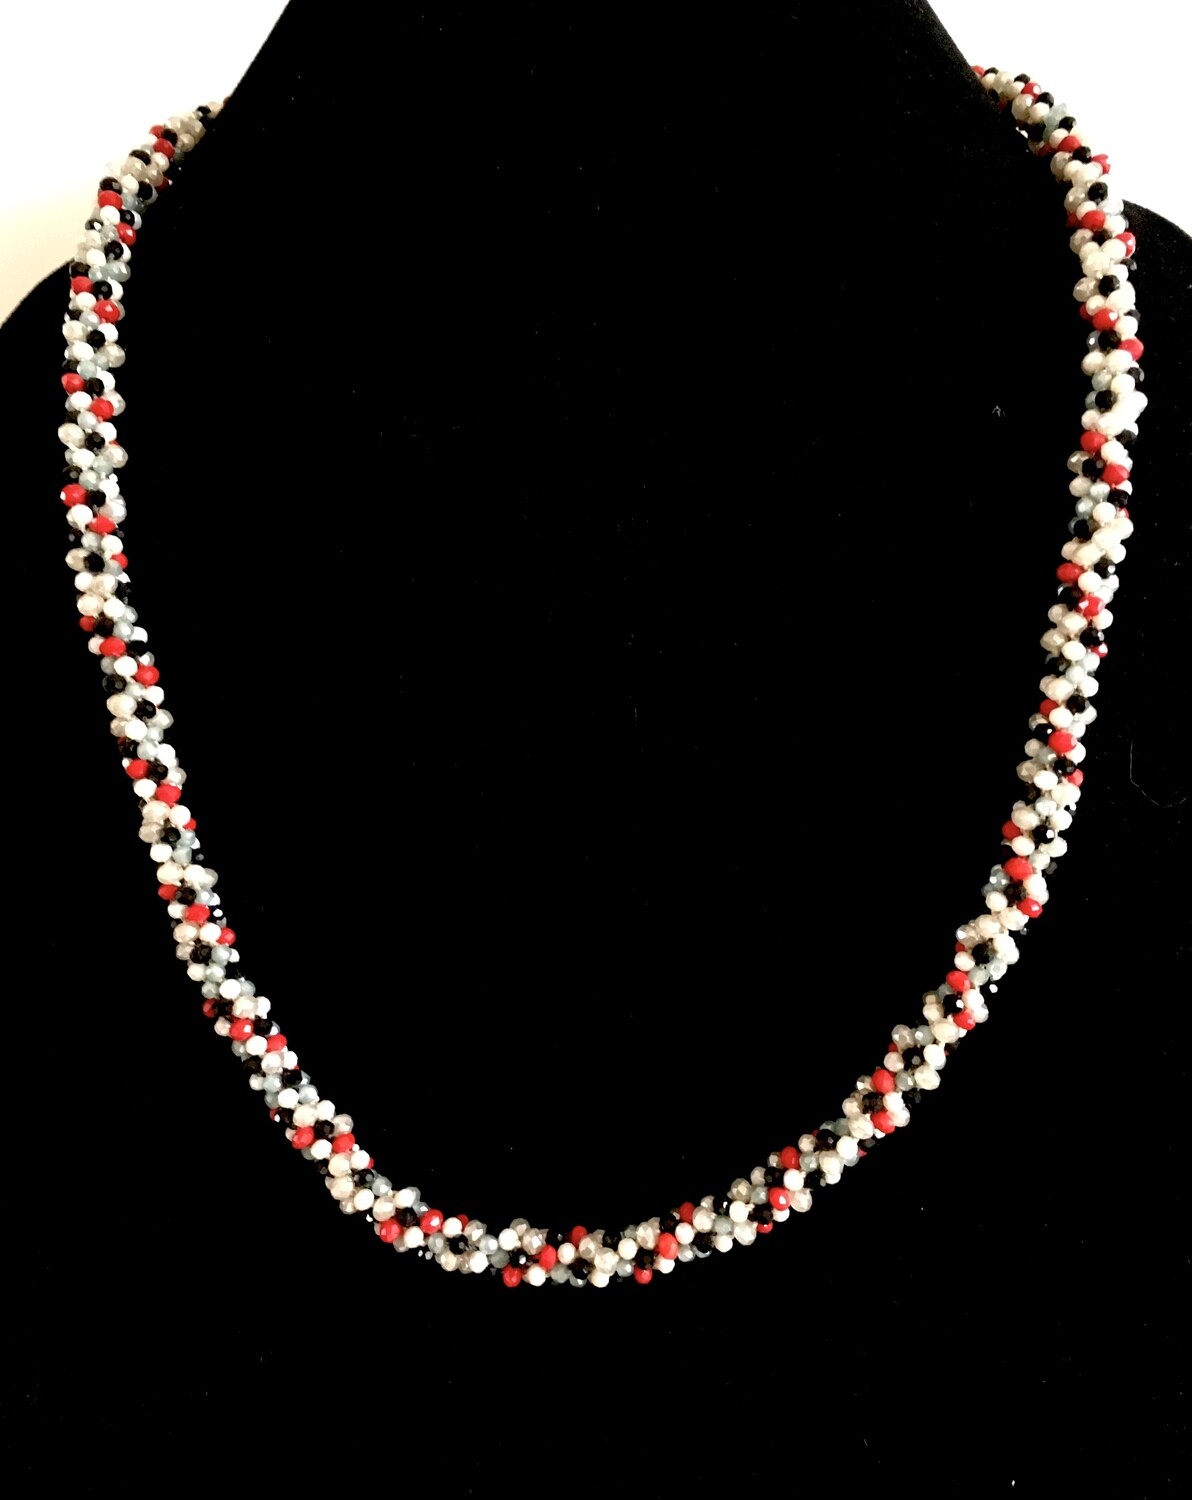 White,red and black Kumihumo necklace